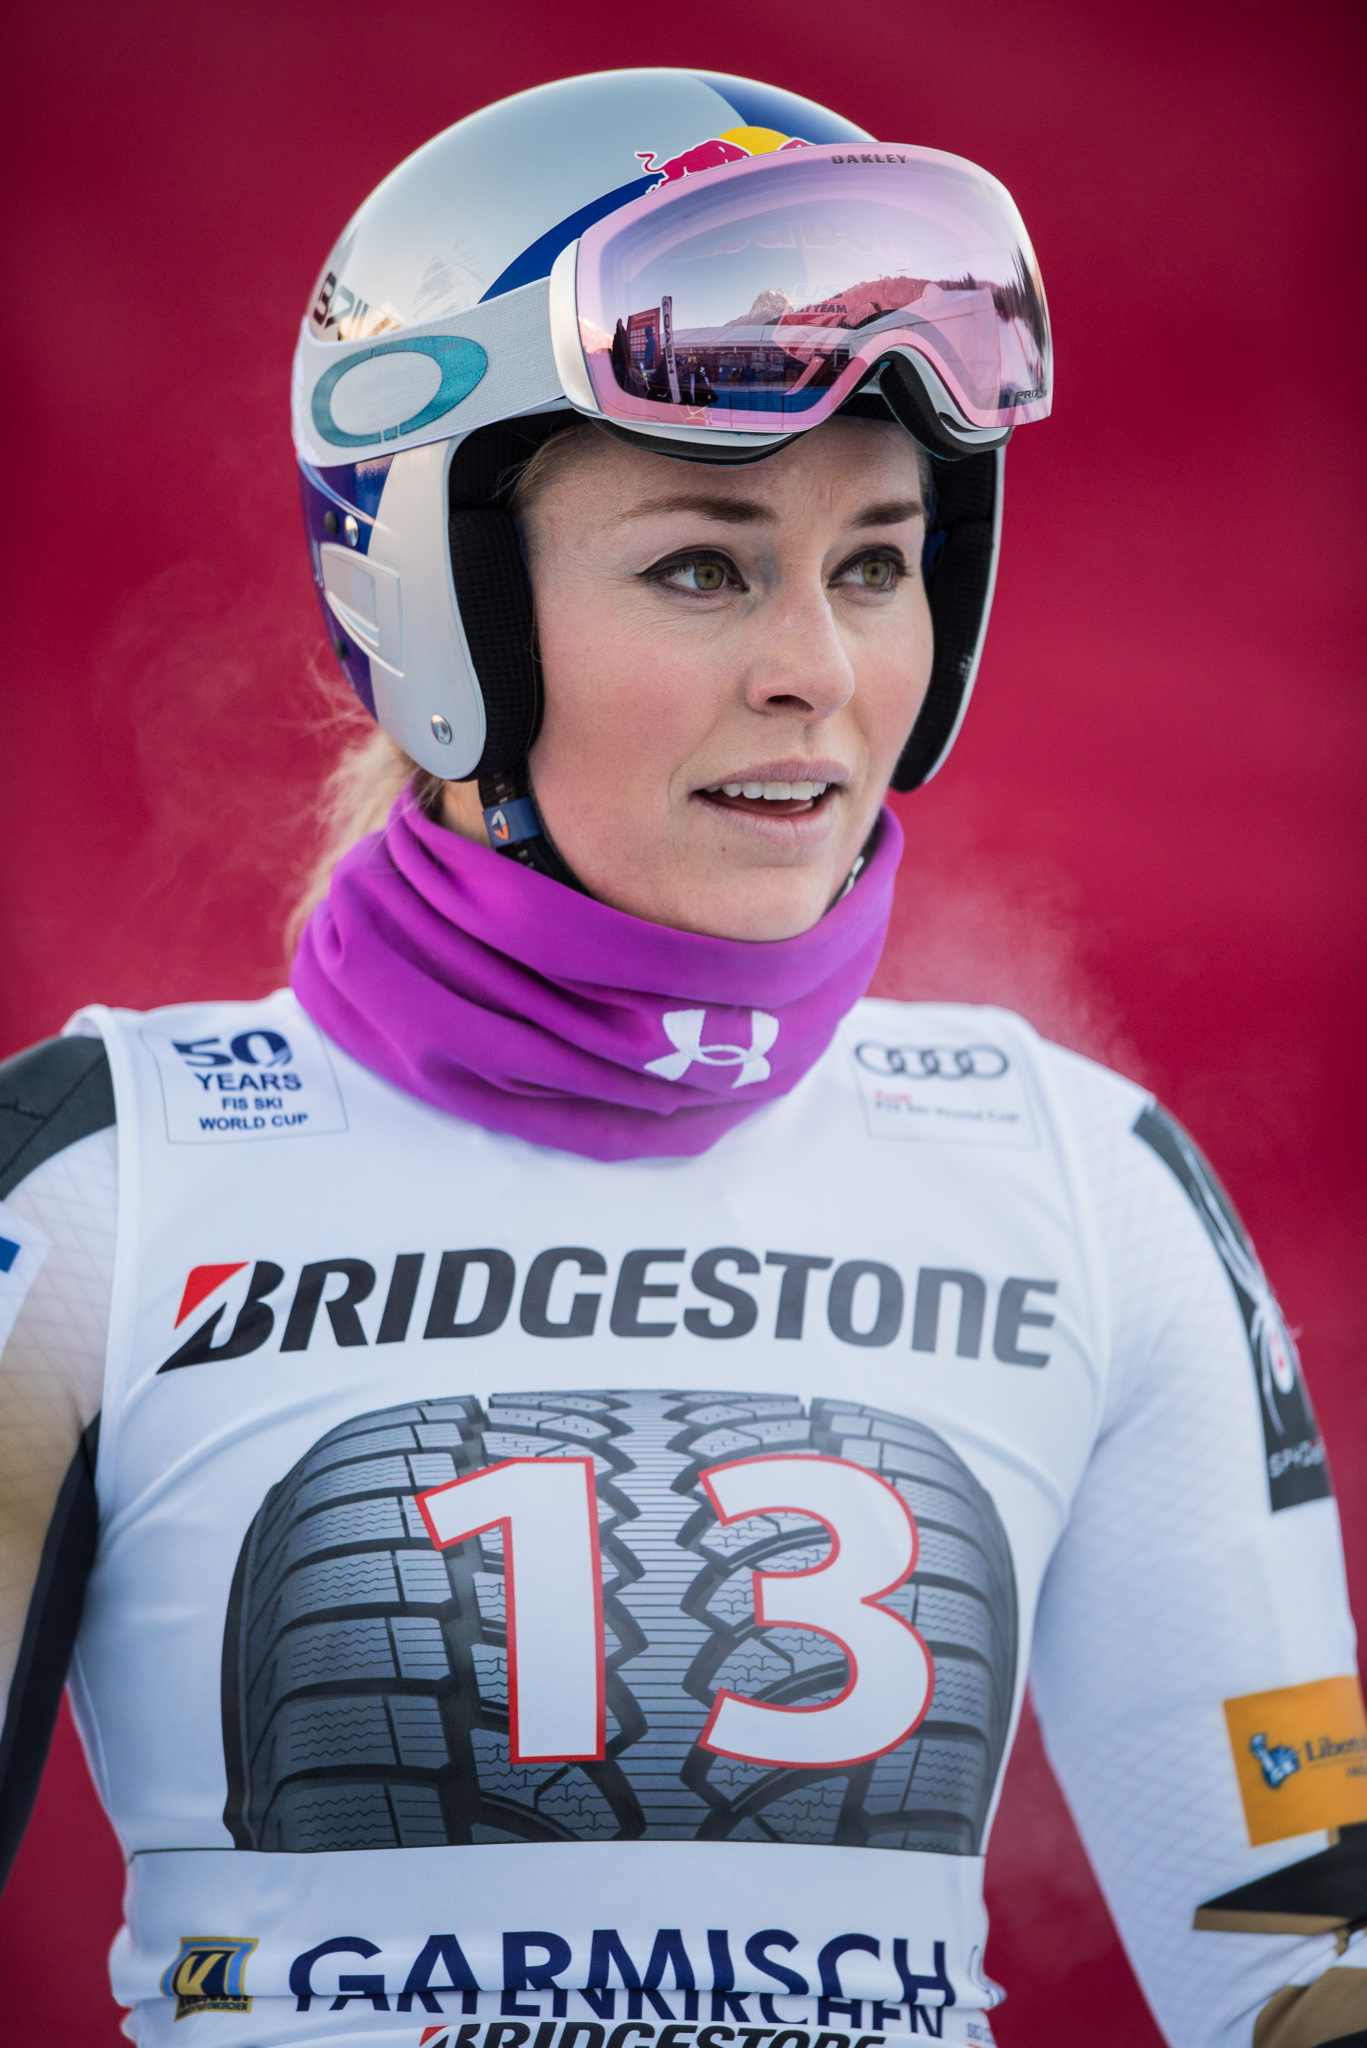 Who is Lindsey Vonn dating?